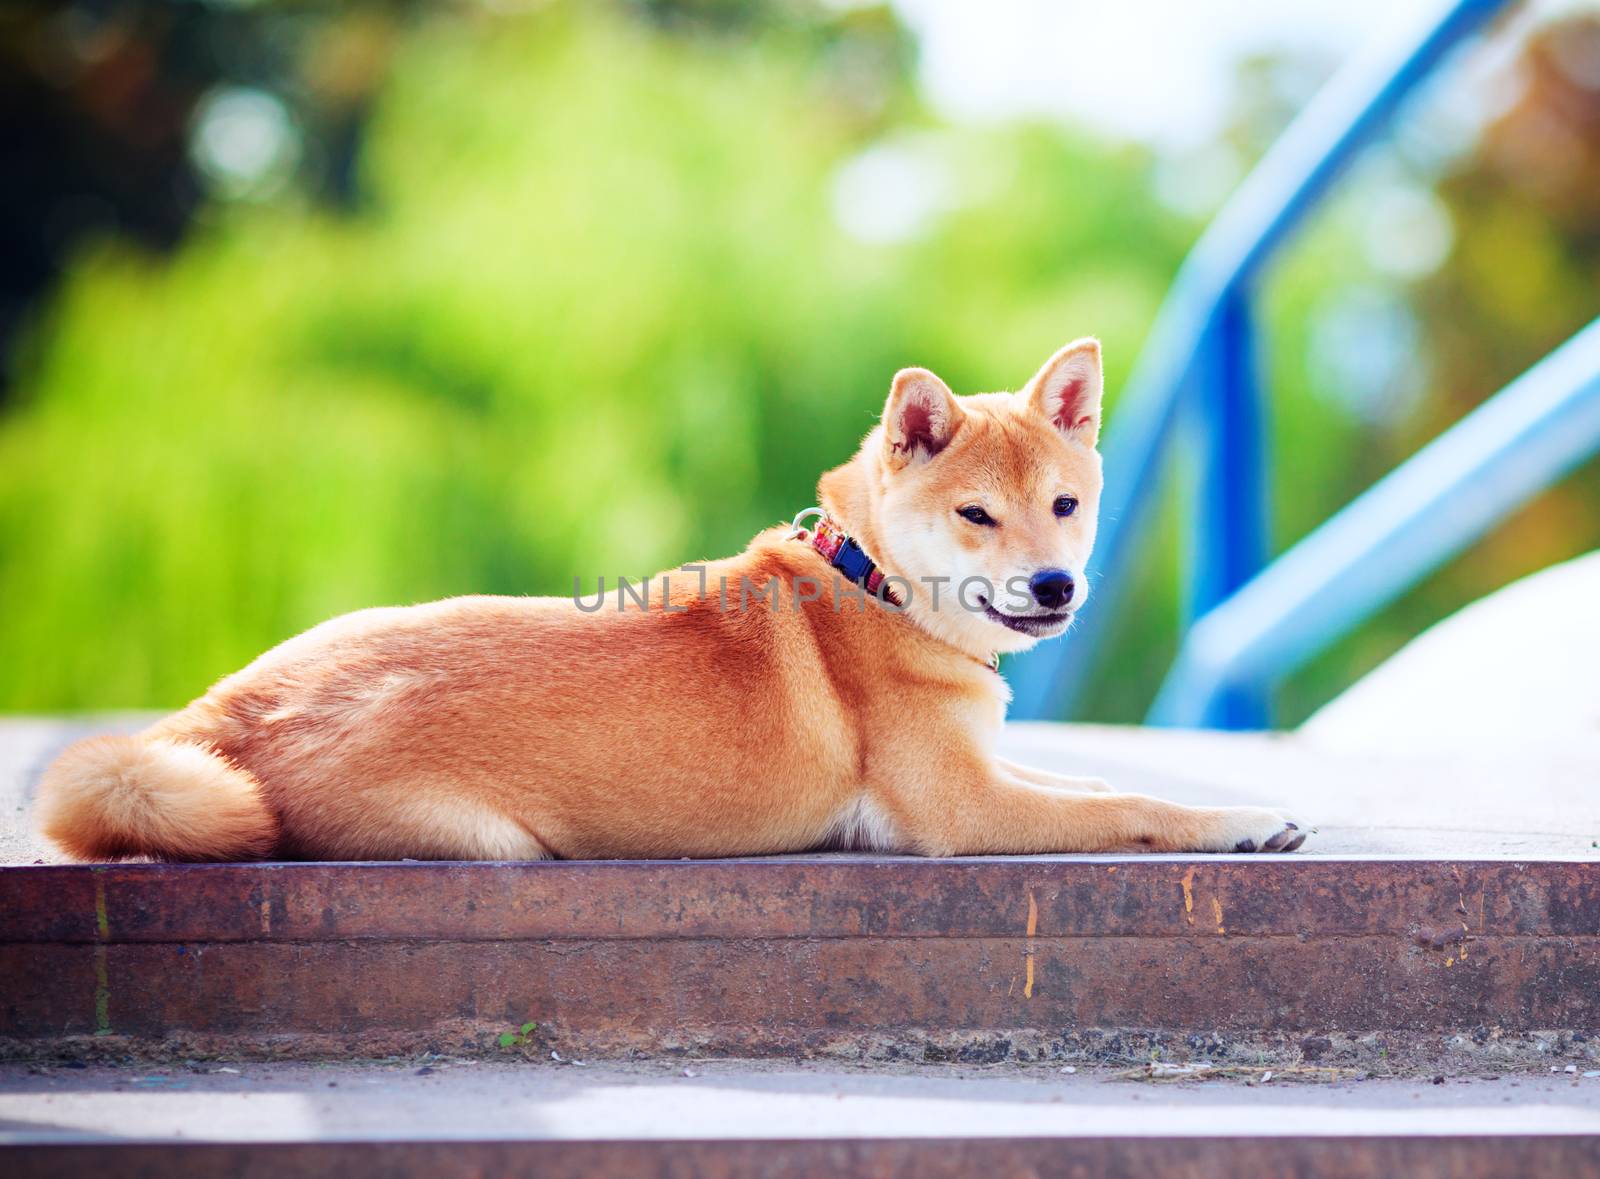 A young shiba inu resting in the park.